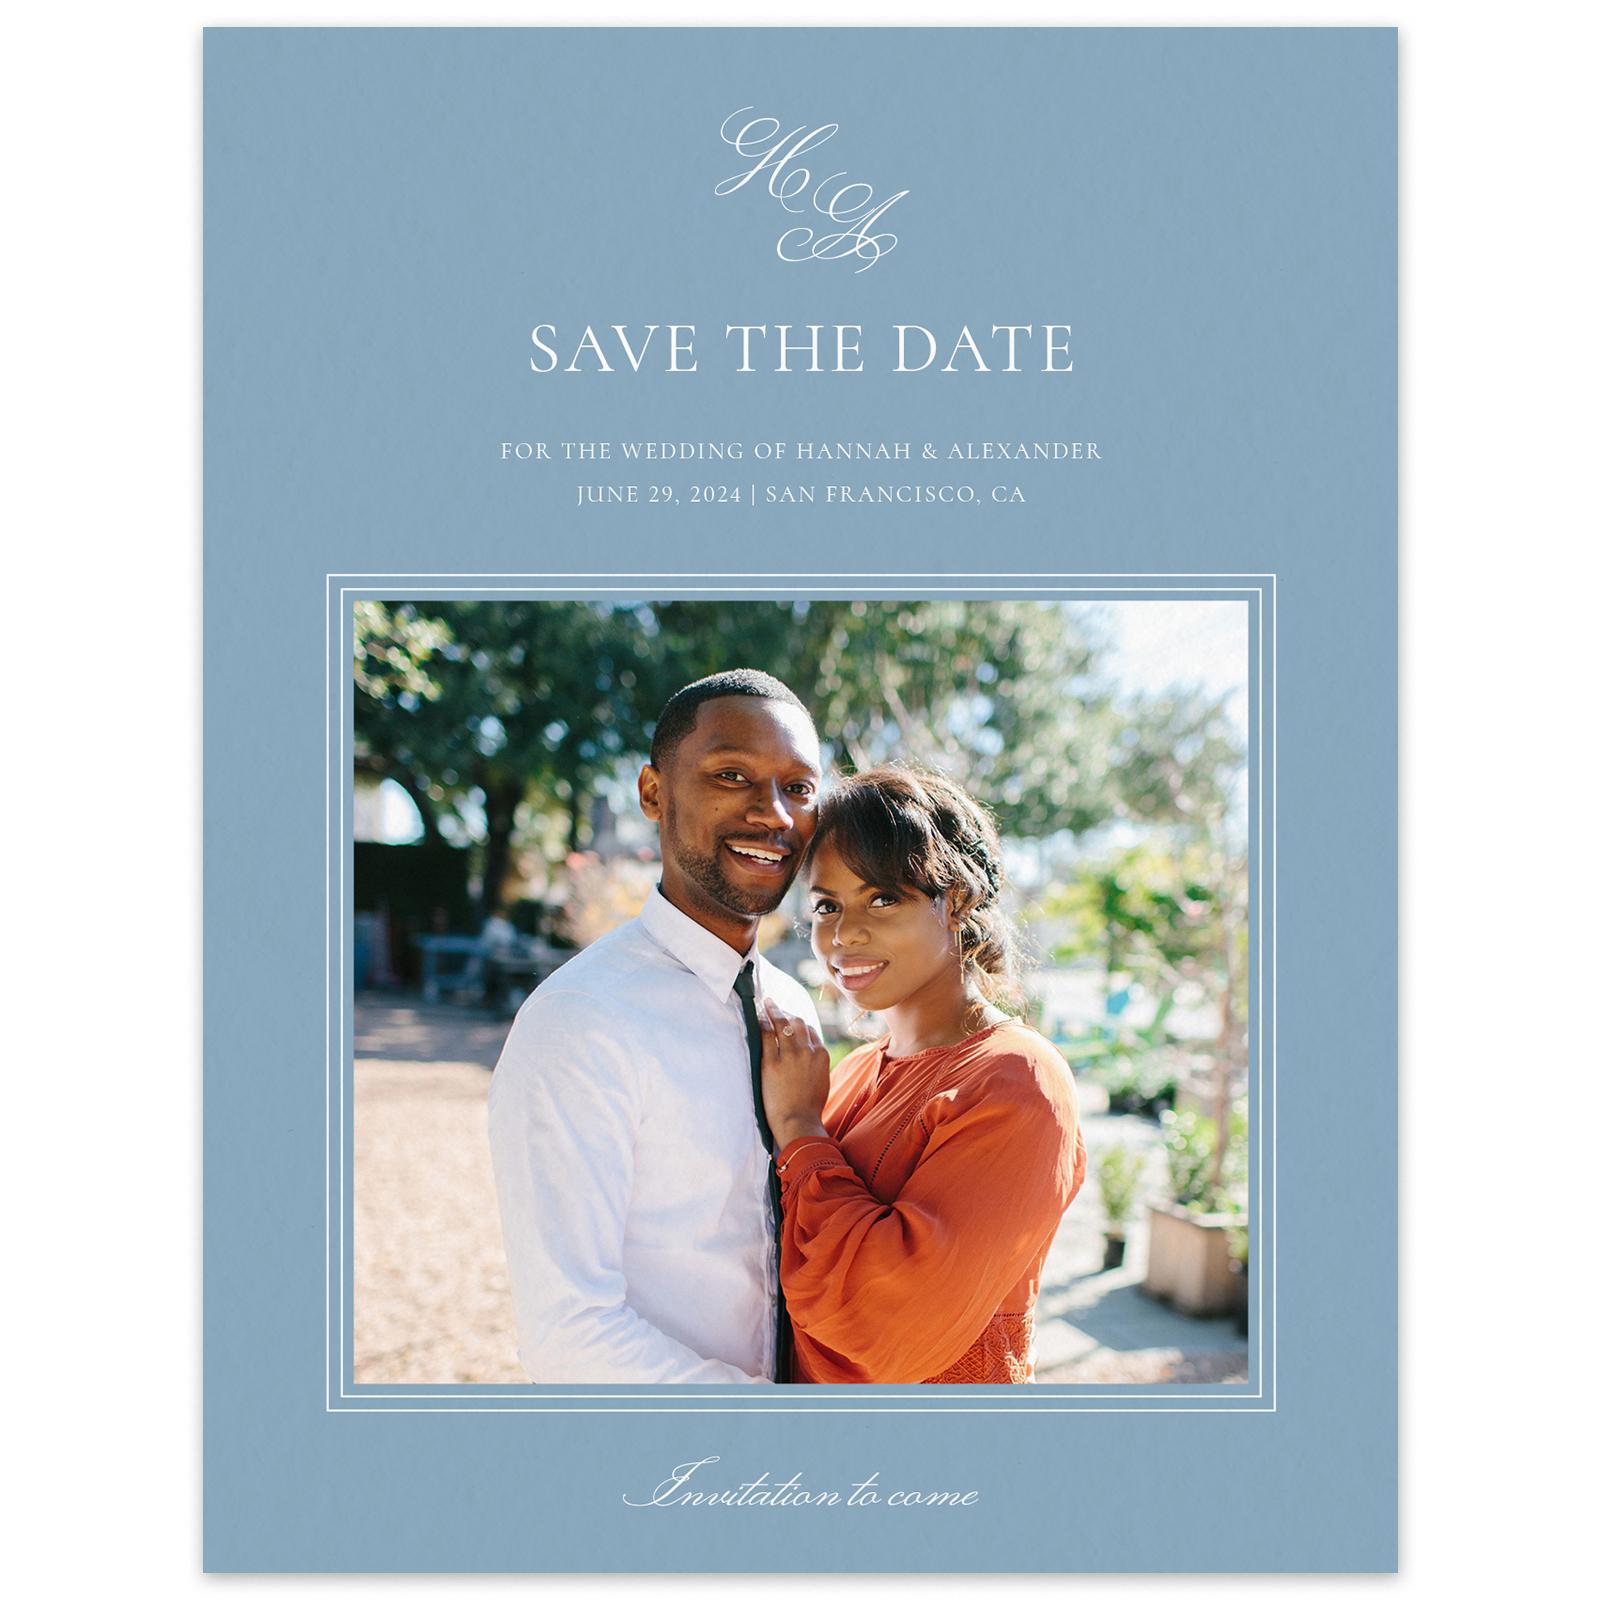 Save The Date - Wyncote Photo preview 